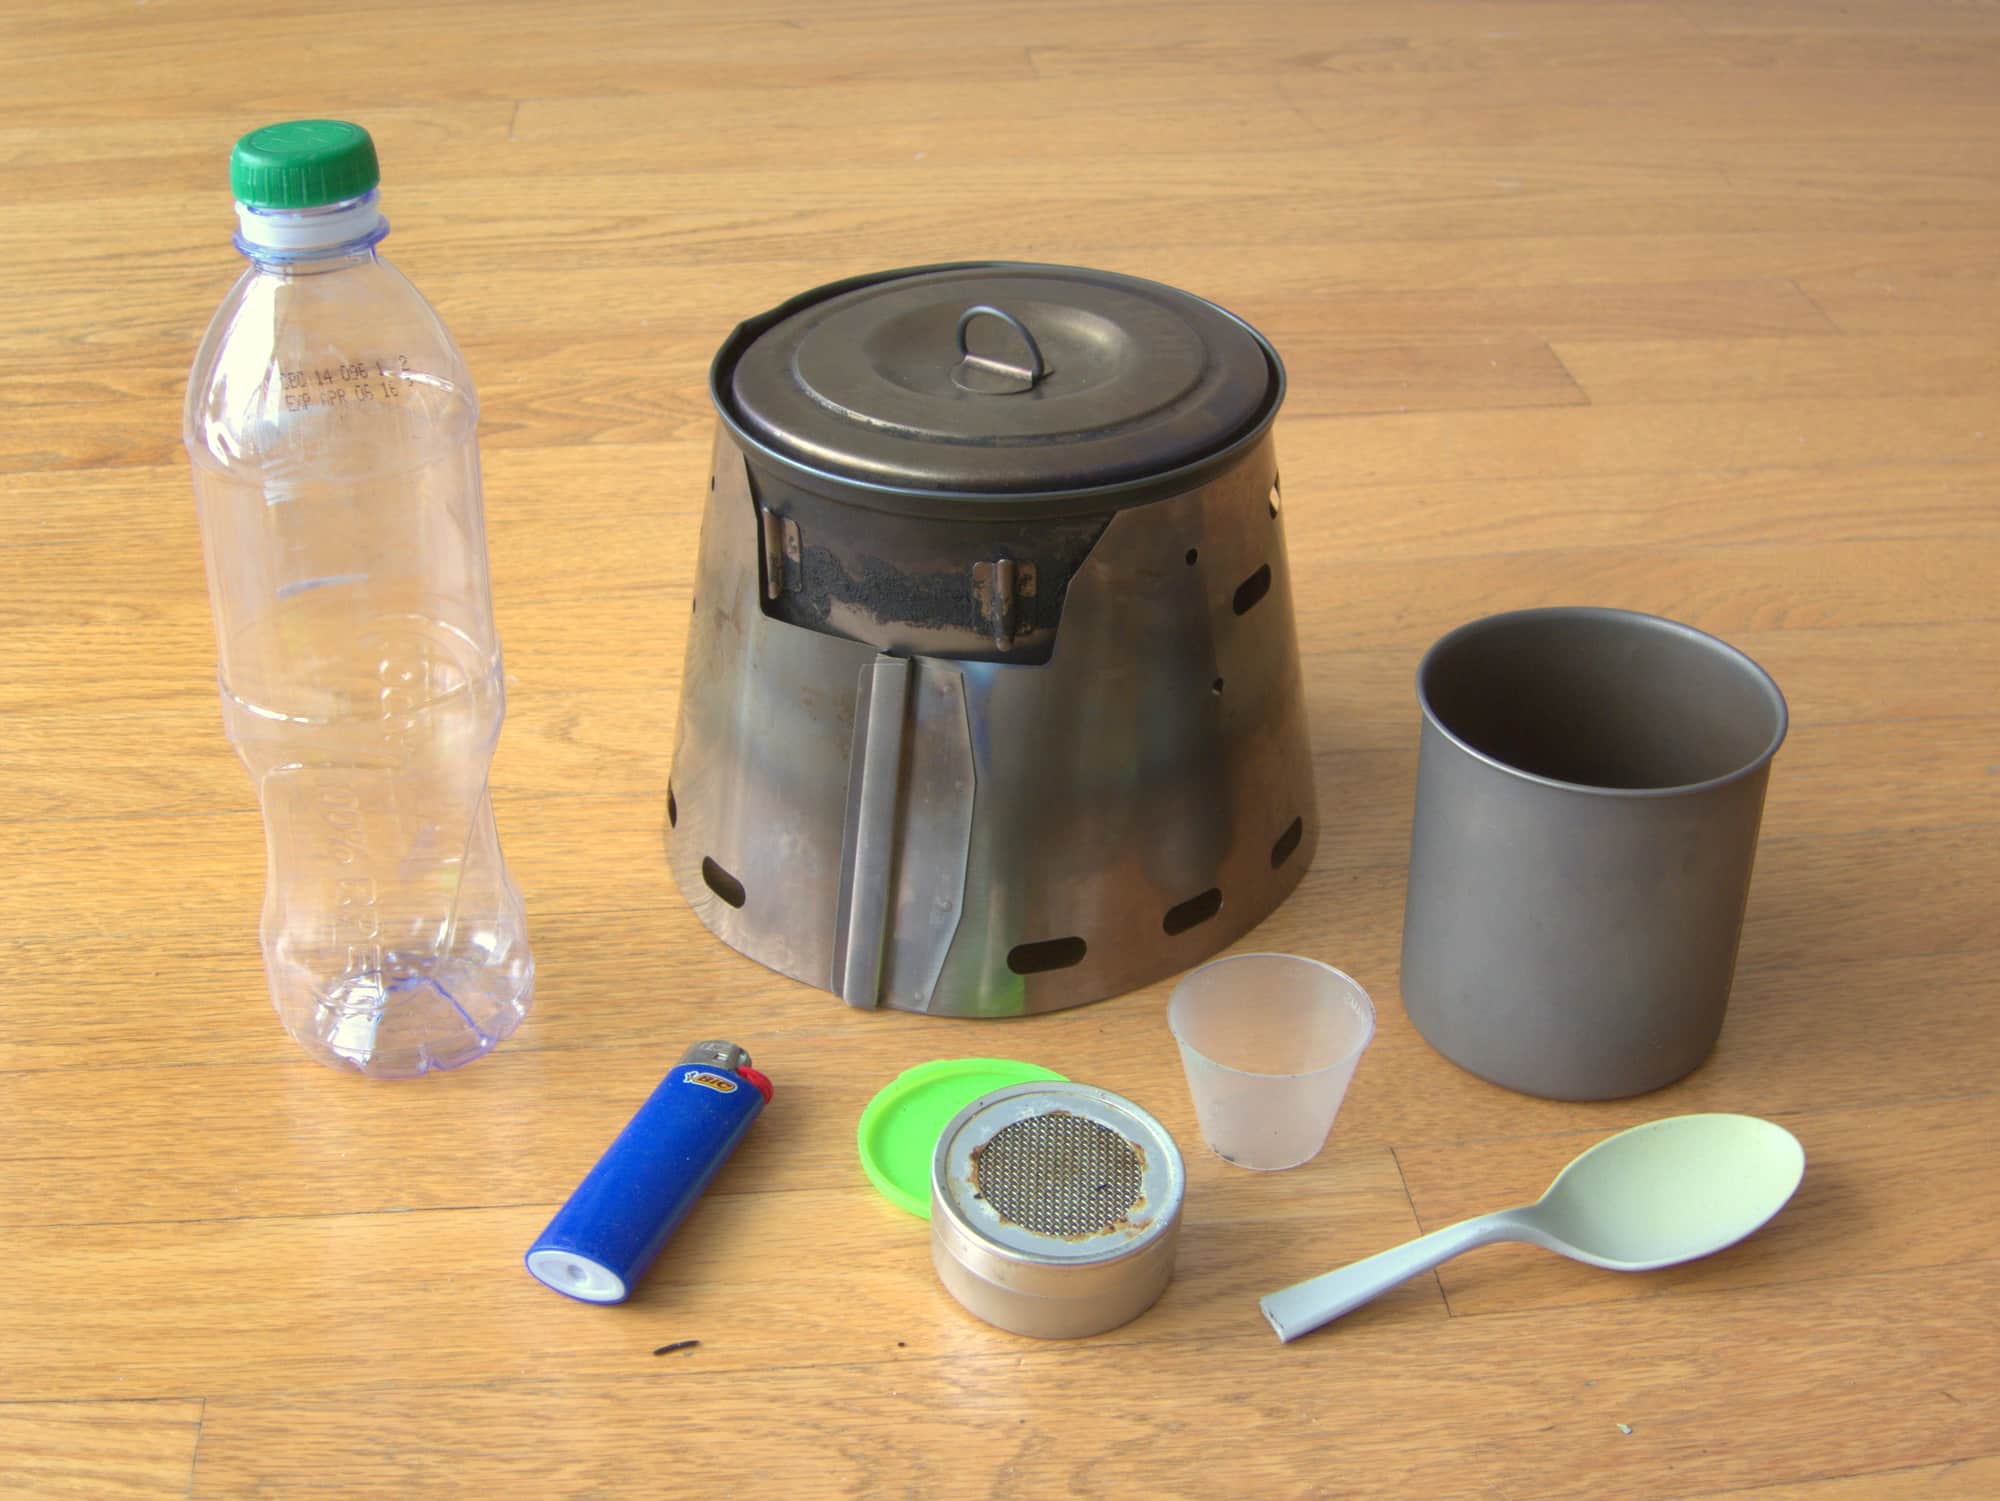 Ultralight Alcohol Stove for Camping and Hiking